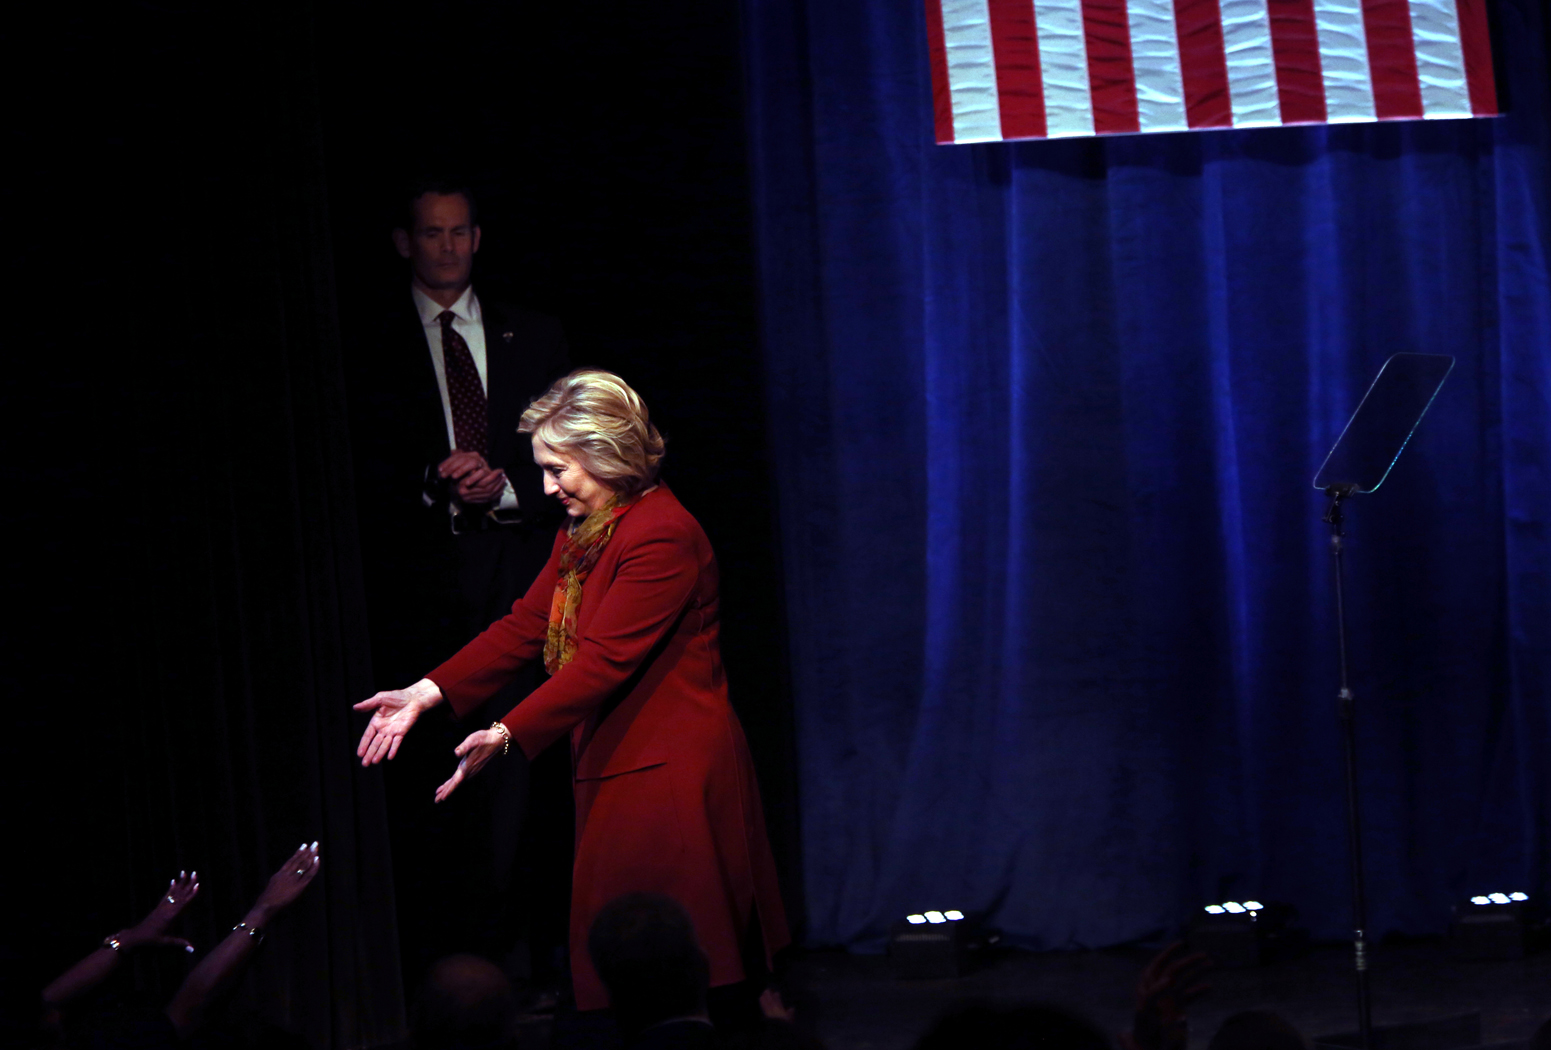 Democratic Presidential candidate Hillary Clinton greets the audience after speaking at the Schomburg Center for Research in Black Culture in Manhattan, NY, on February 16, 2016. (For Washington Post)